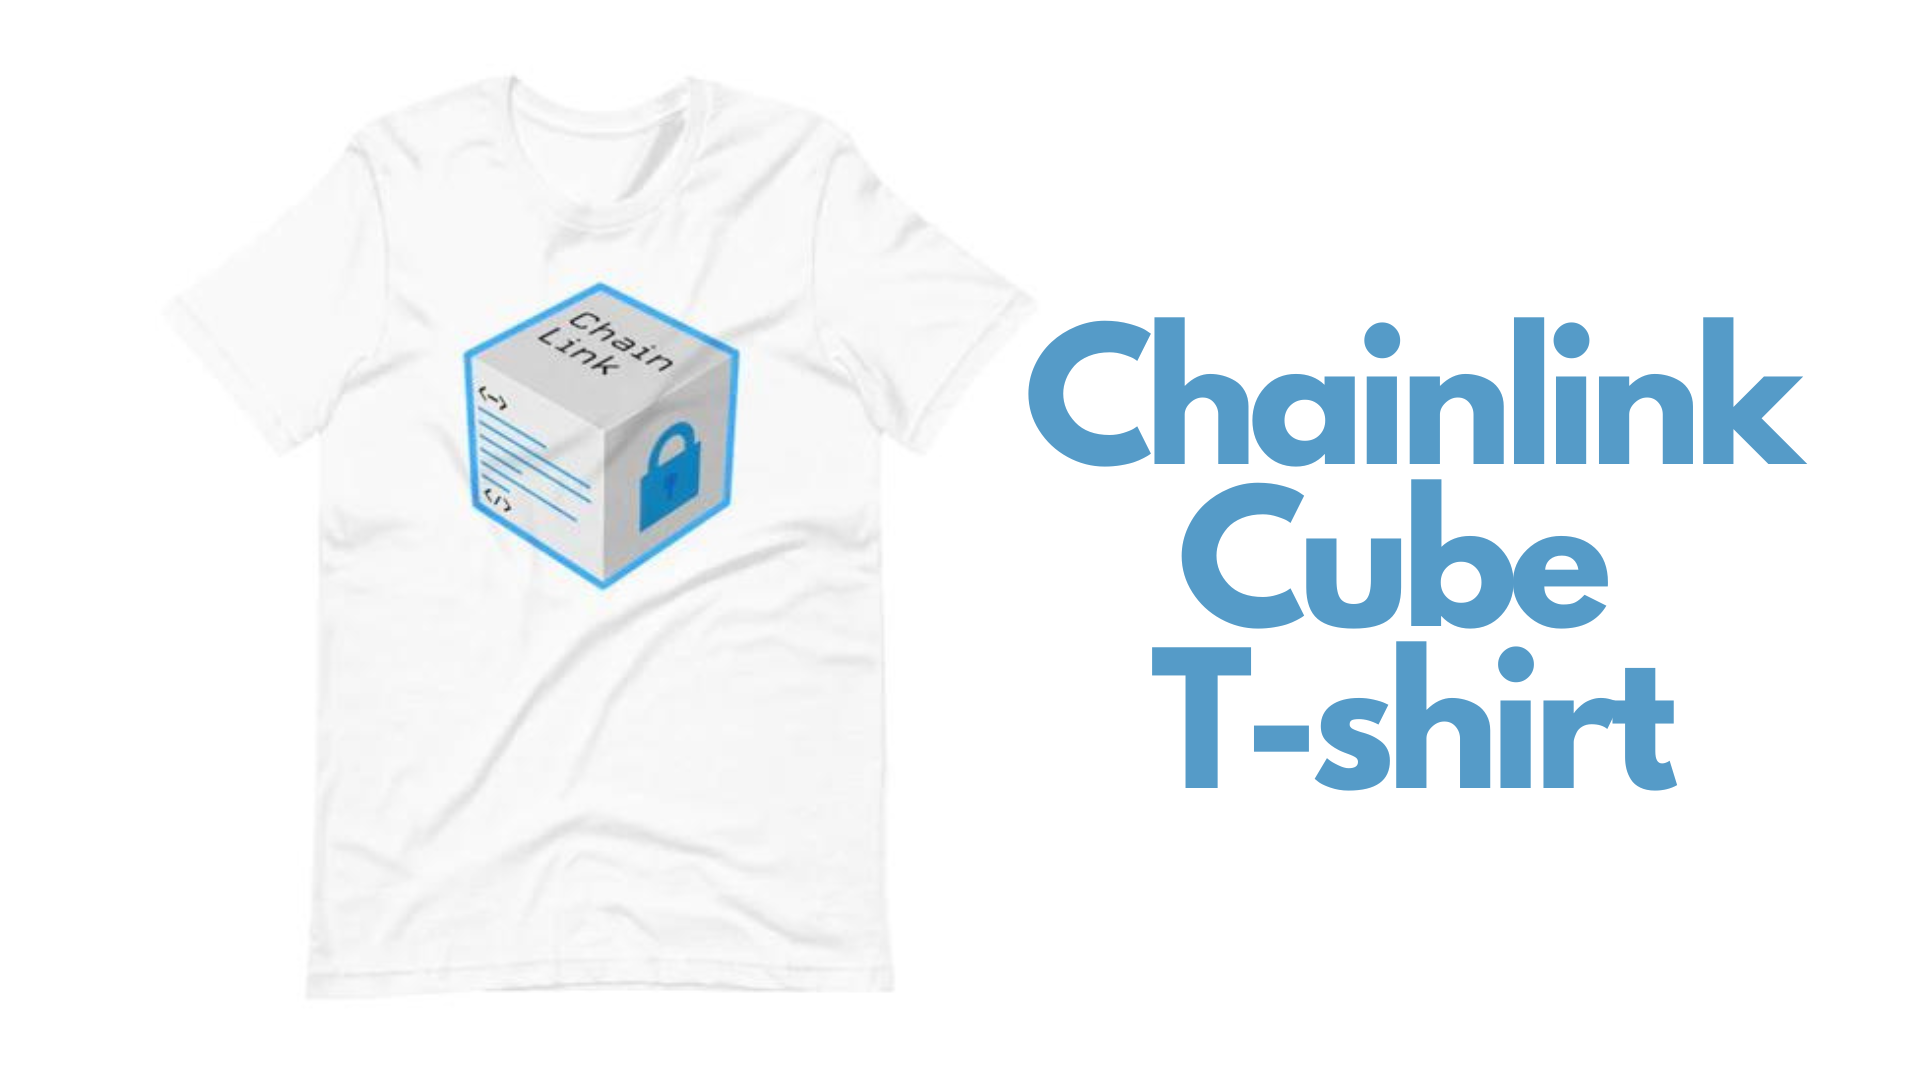 A white shirt with a cube design and word Chainlink Cube T-shirt on the left